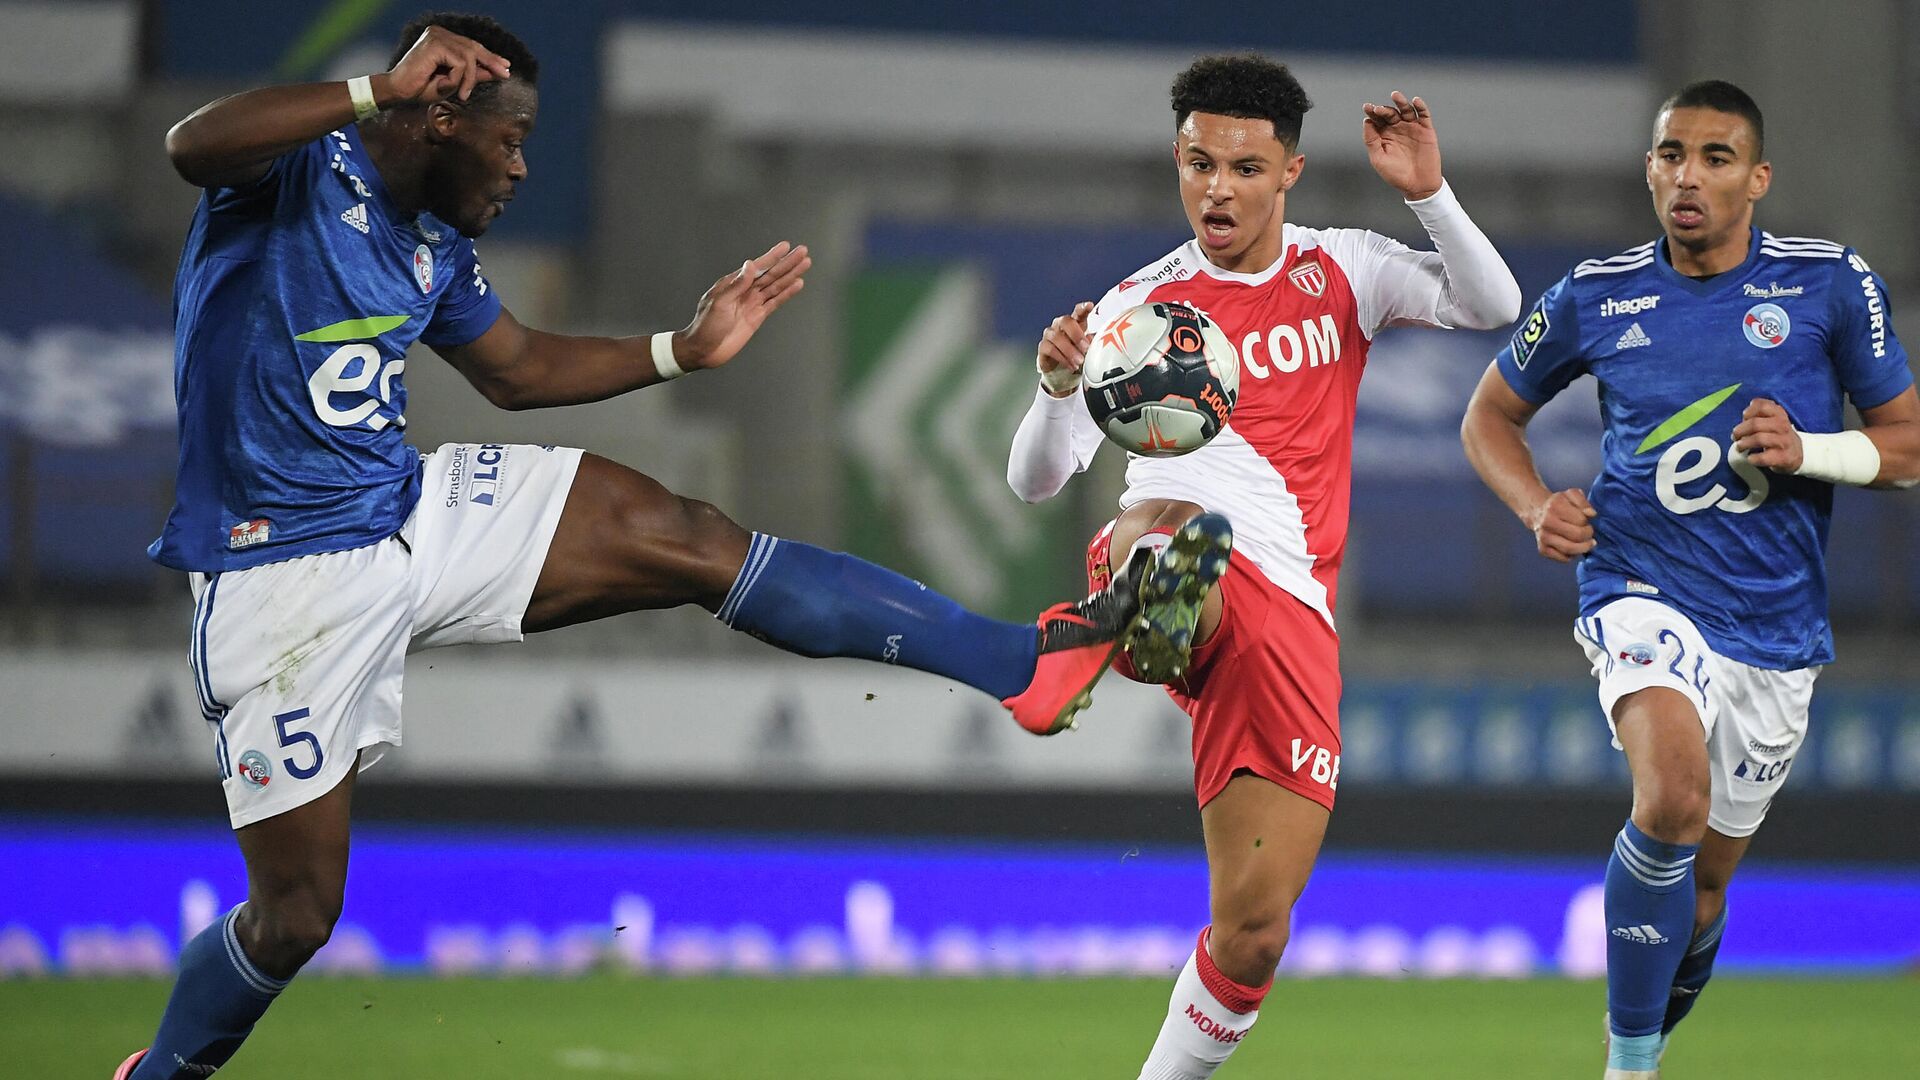 Monaco’s French midfielder Sofiane Diop (C) fights for the ball with Strasbourg’s Ivorian defender Lamine Kone (L) during the French L1 football match between Racing Club Strasbourg Alsace and AS Monaco at the Meinau stadium in Strasbourg, eastern France on March 3, 2021. (Photo by Frederick FLORIN / AFP) - РИА Новости, 1920, 04.03.2021